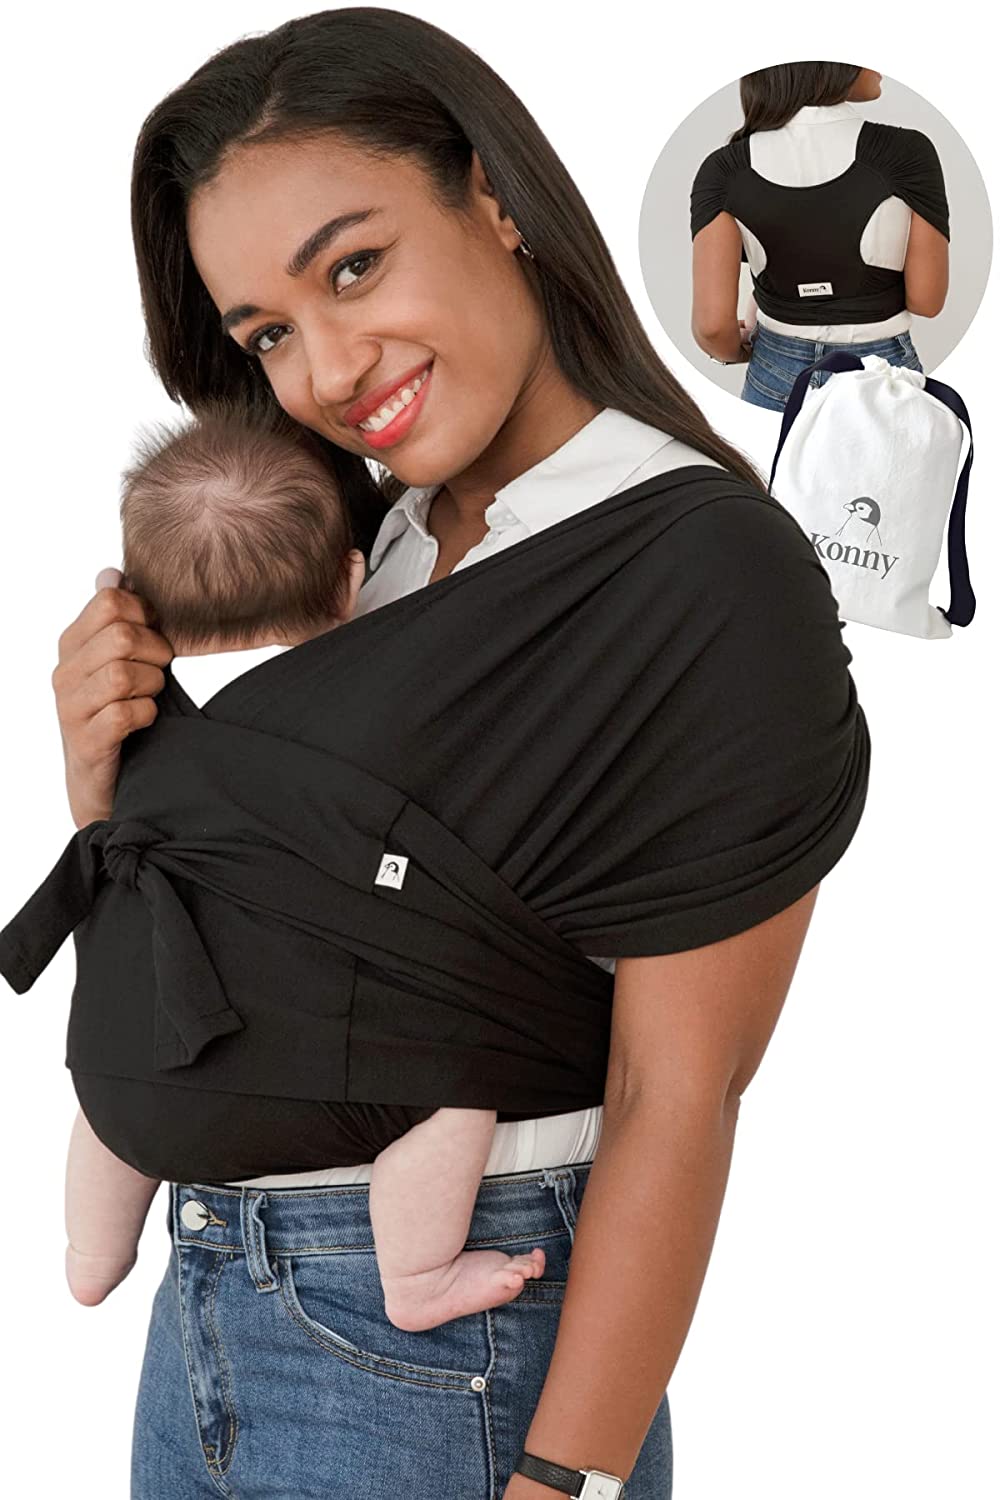 Konny Baby Carrier | Ultra-Light, Easy Baby Sling | Newborns, Infants up to 20 kg Toddlers | Soft and Breathable Fabric | Useful Sleep Solution (Black, L)